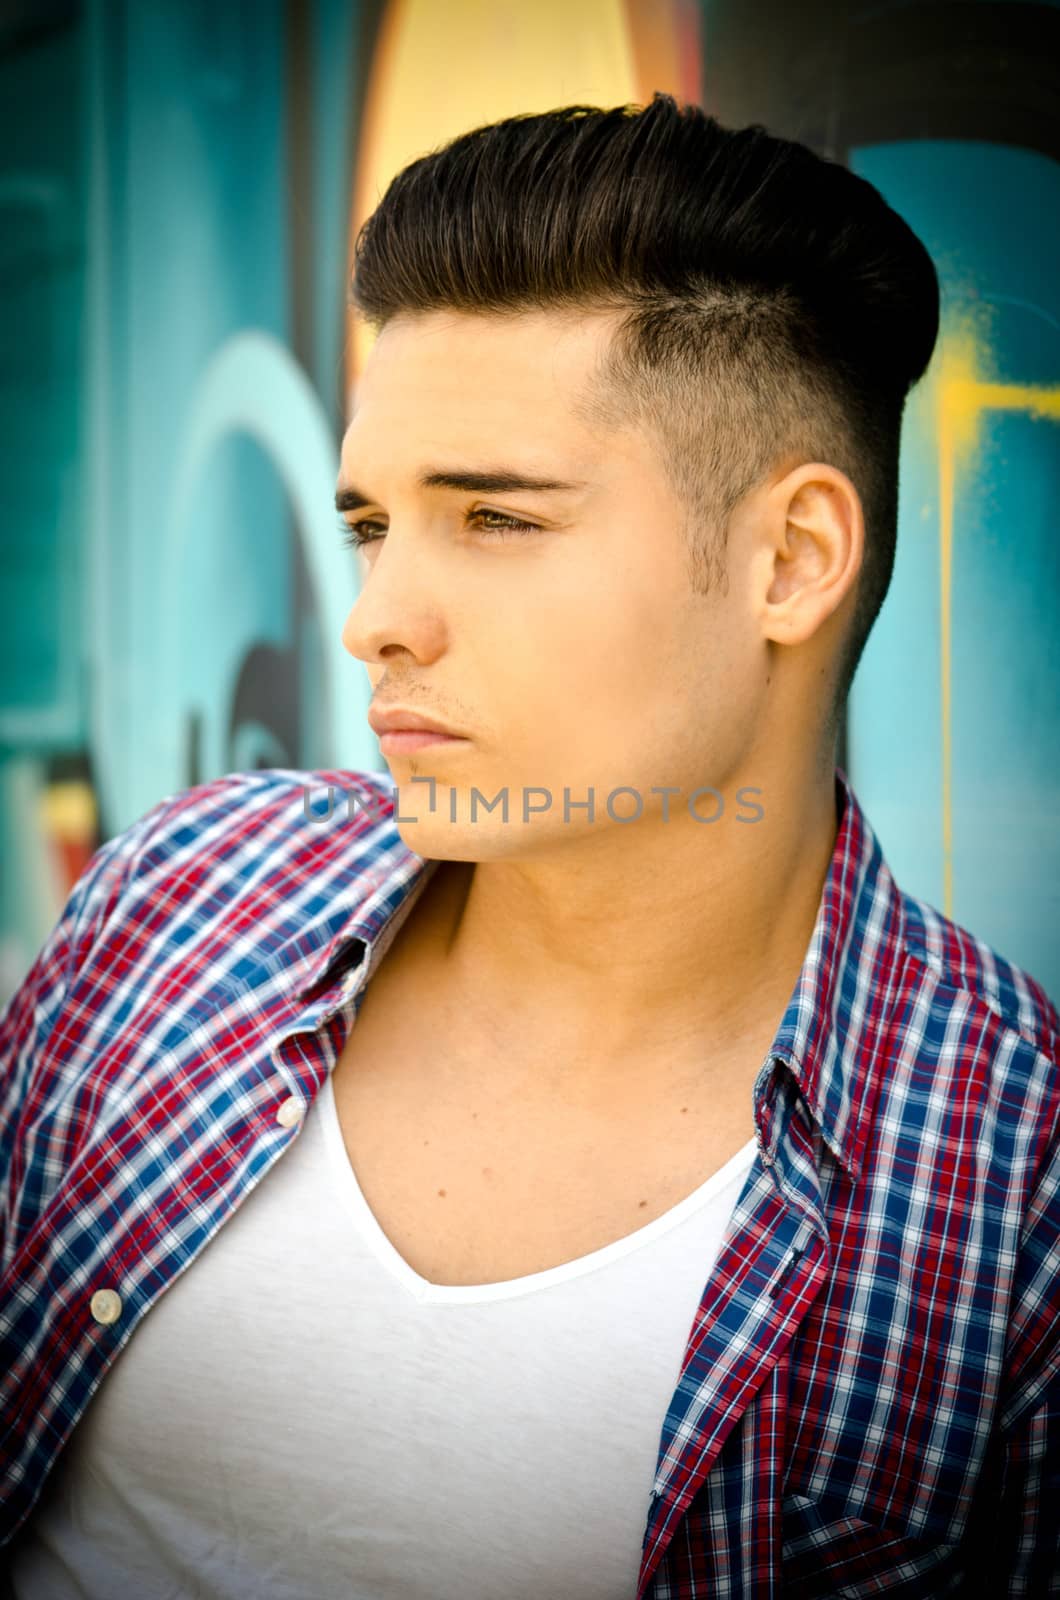 Profile of handsome young man against colorful graffiti covered wall